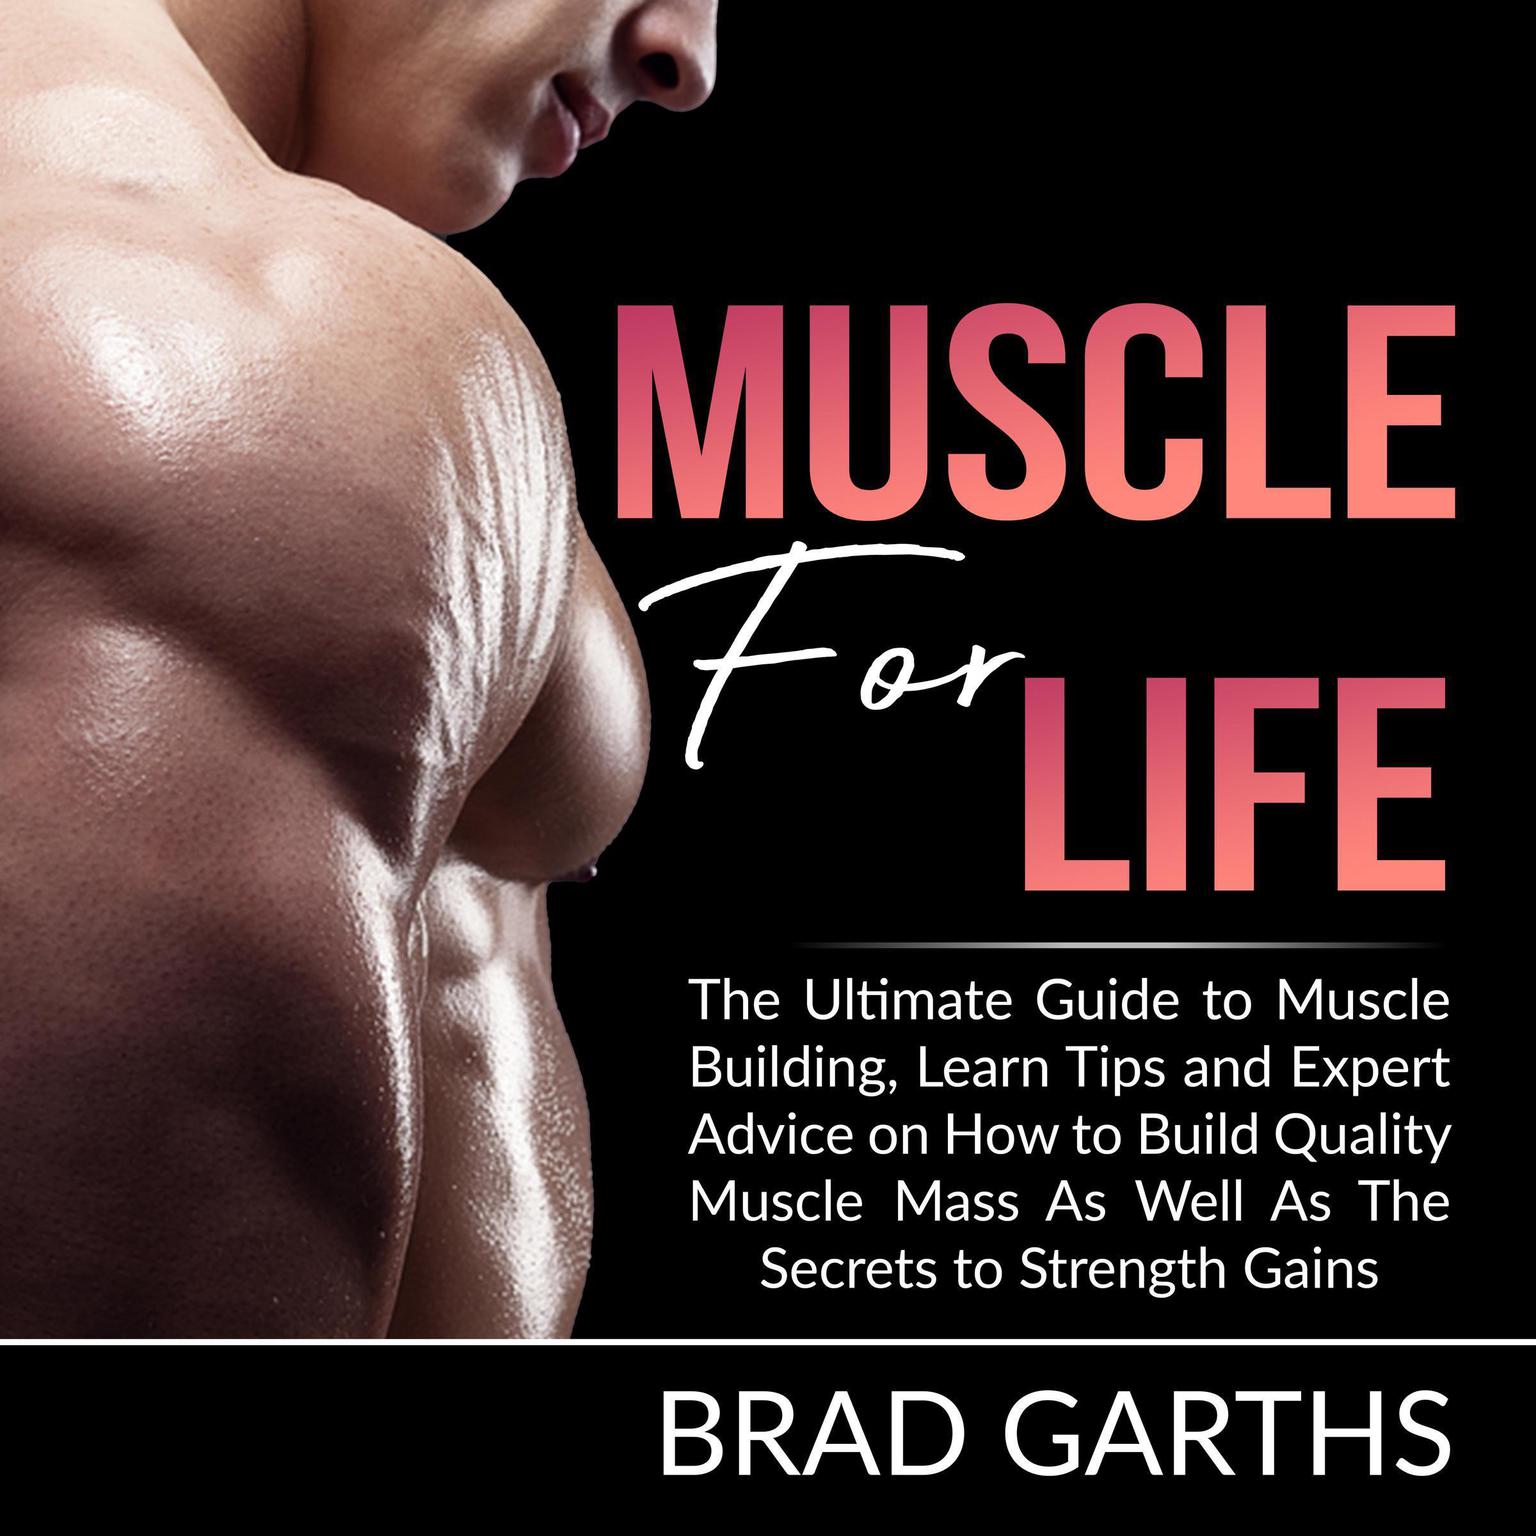 Muscle for Life: The Ultimate Guide to Muscle Building, Learn Tips and Expert Advice on How to Build Quality Muscle Mass As Well As The Secrets to Strength Gains Audiobook, by Brad Garths